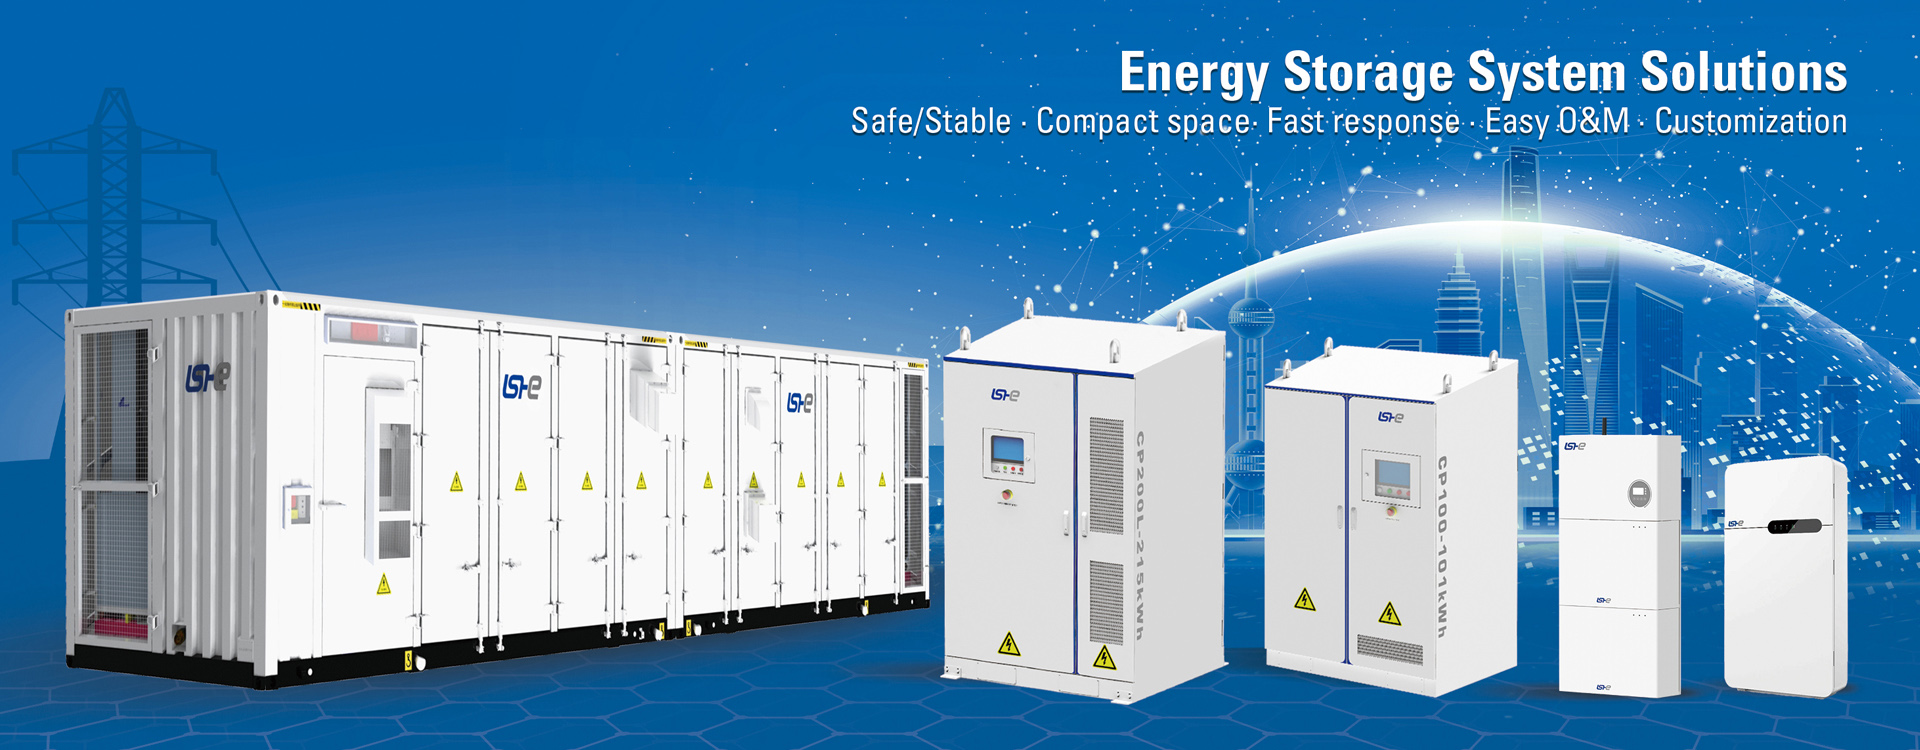 Energy Storage System Solutions